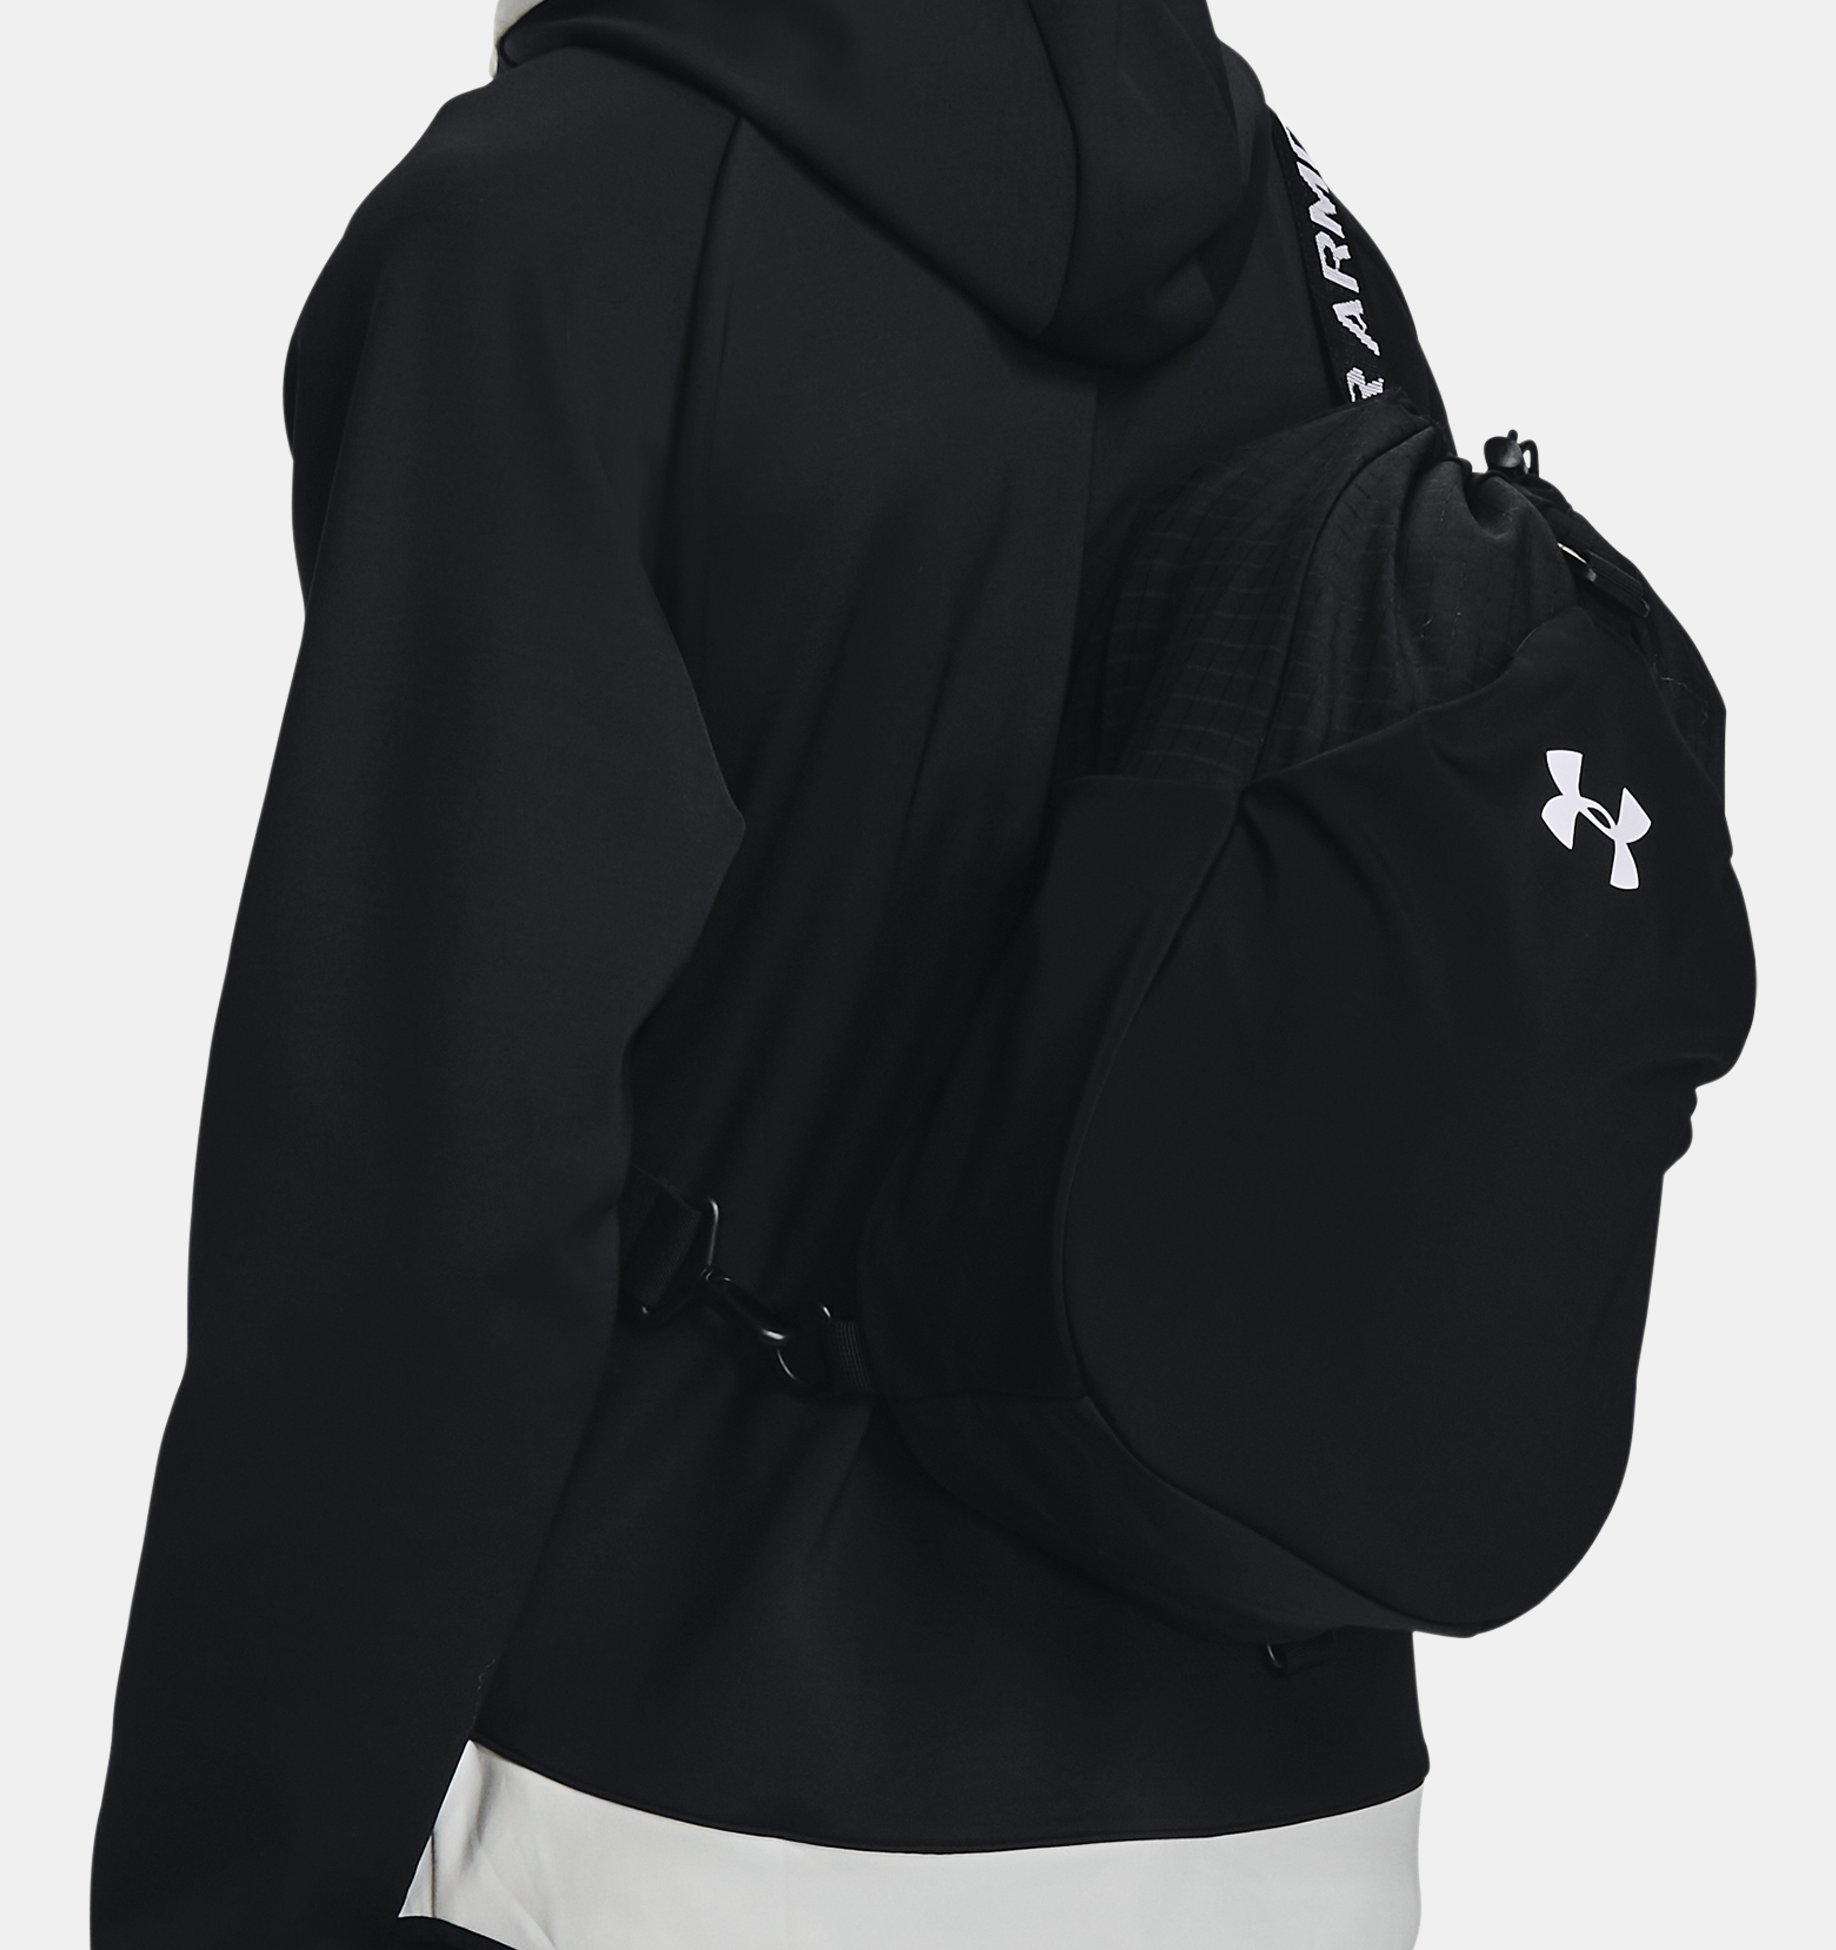  Under Armour Adult Flex Sling Bag , Black (001)/White , One  Size Fits All : Sports & Outdoors